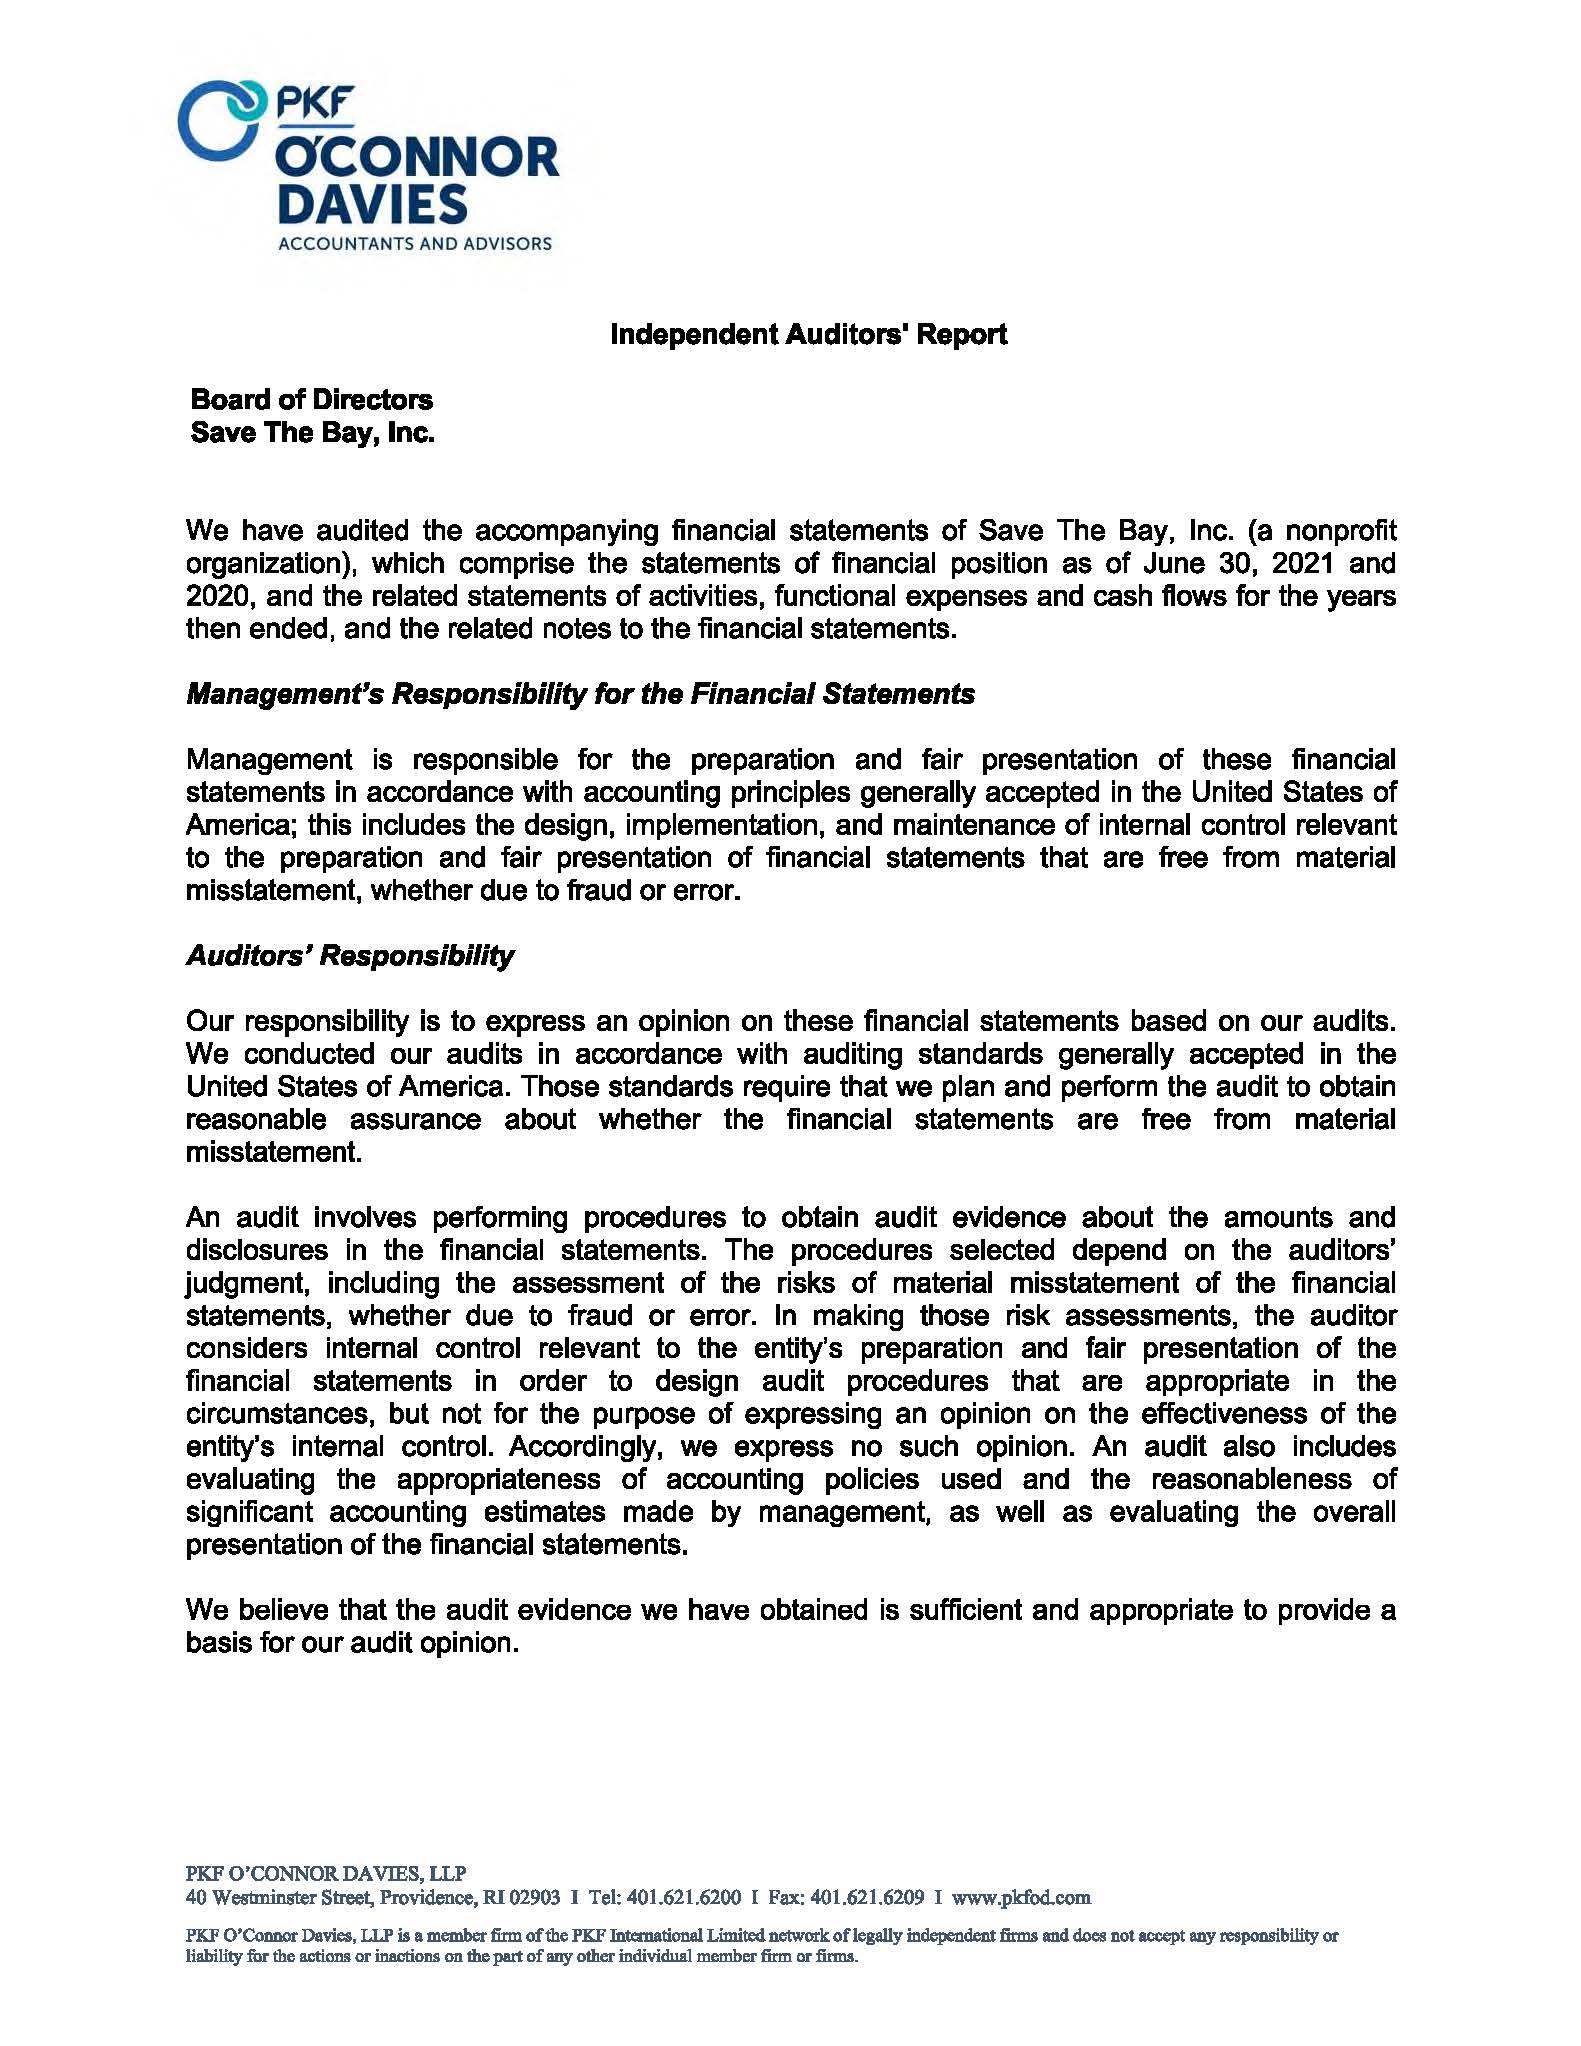 The cover letter of Save The Bay's FY21 Audit Cover Sheet